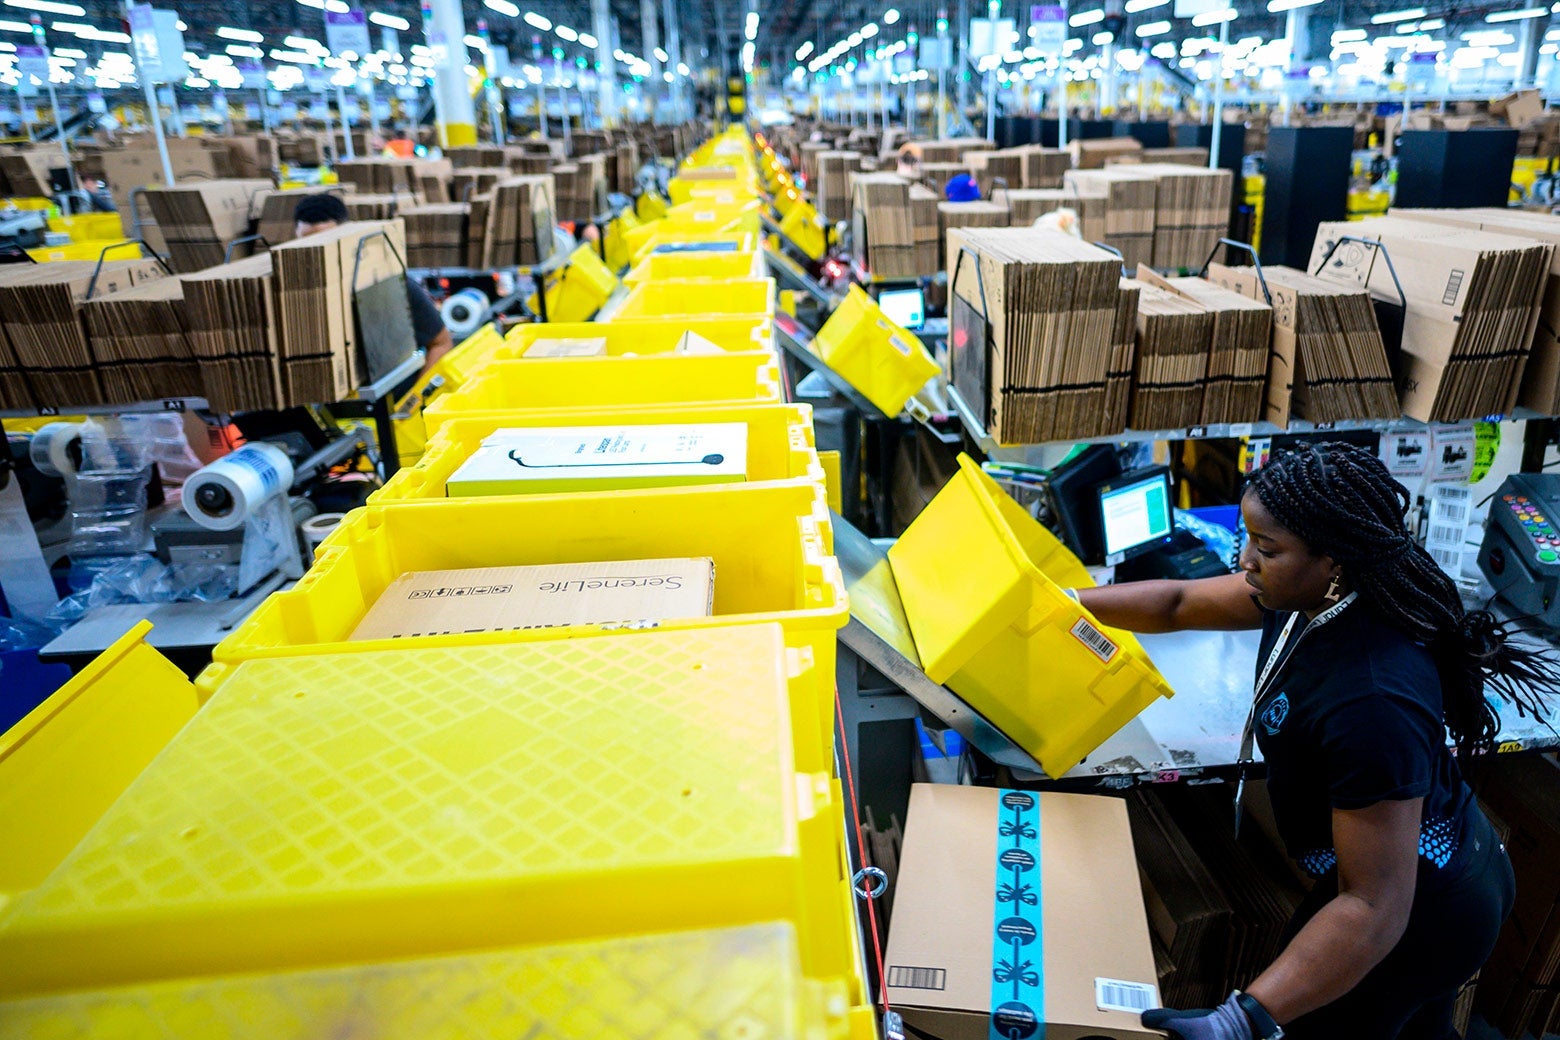 A woman works at a packing station at an Amazon fulfillment center.